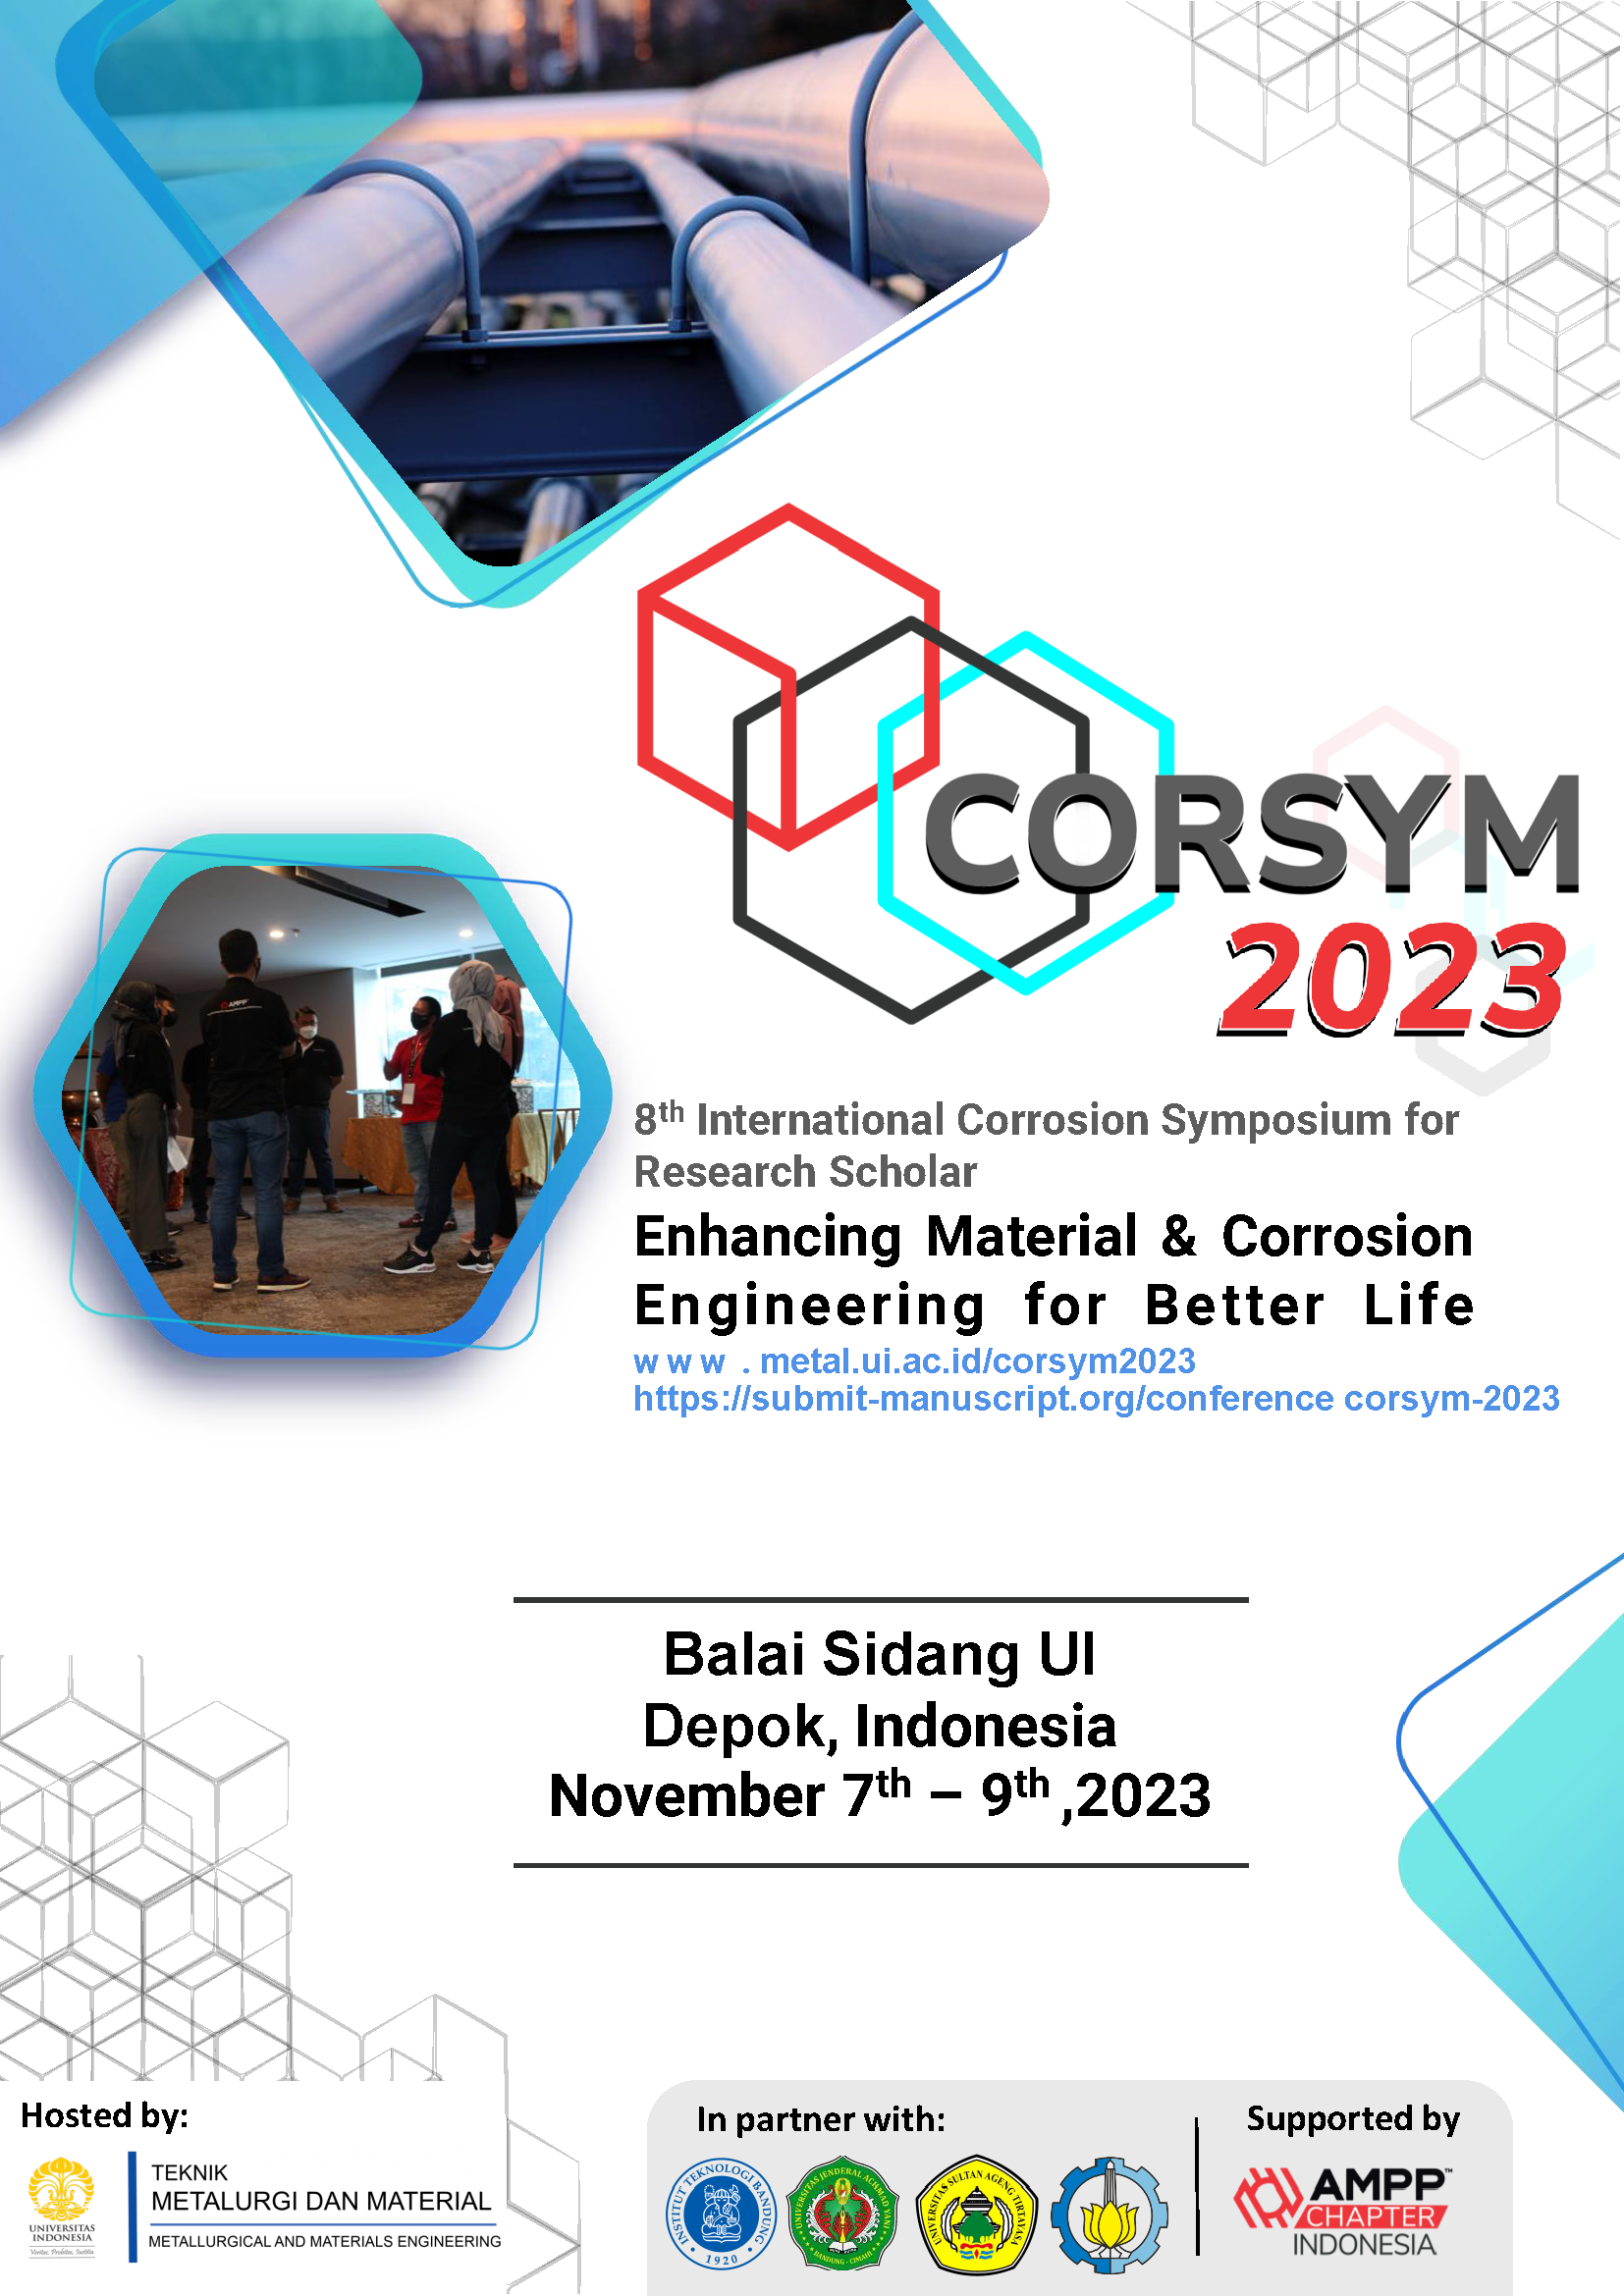 CORSYM 2023 The 8th International Corrosion Prevention Symposium for Research Scholars